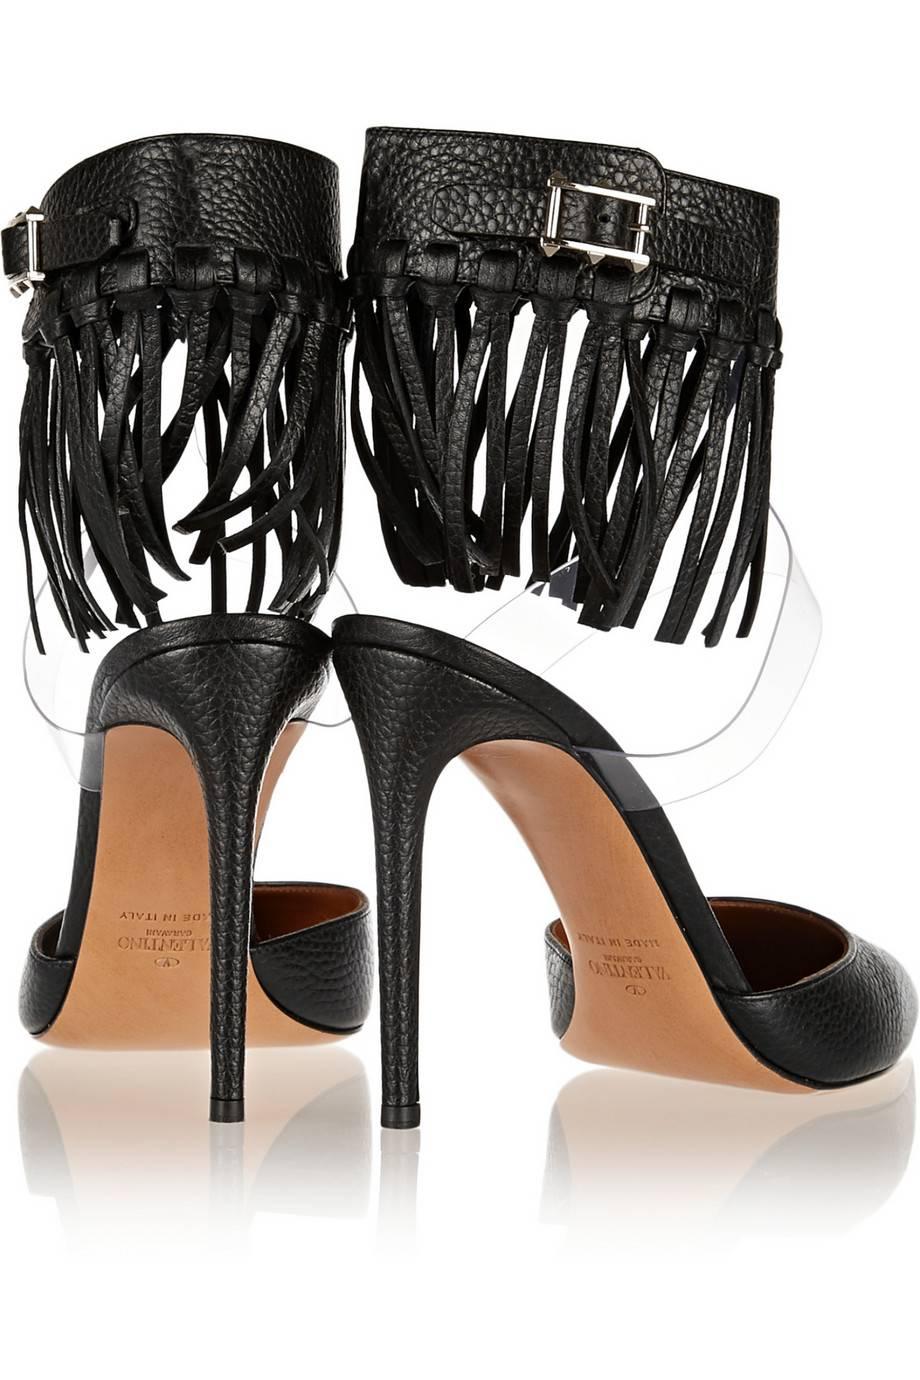 Women's Valentino Black Leather Fringe PVC Pointy Ankle Sandal Heels Shoes in Box